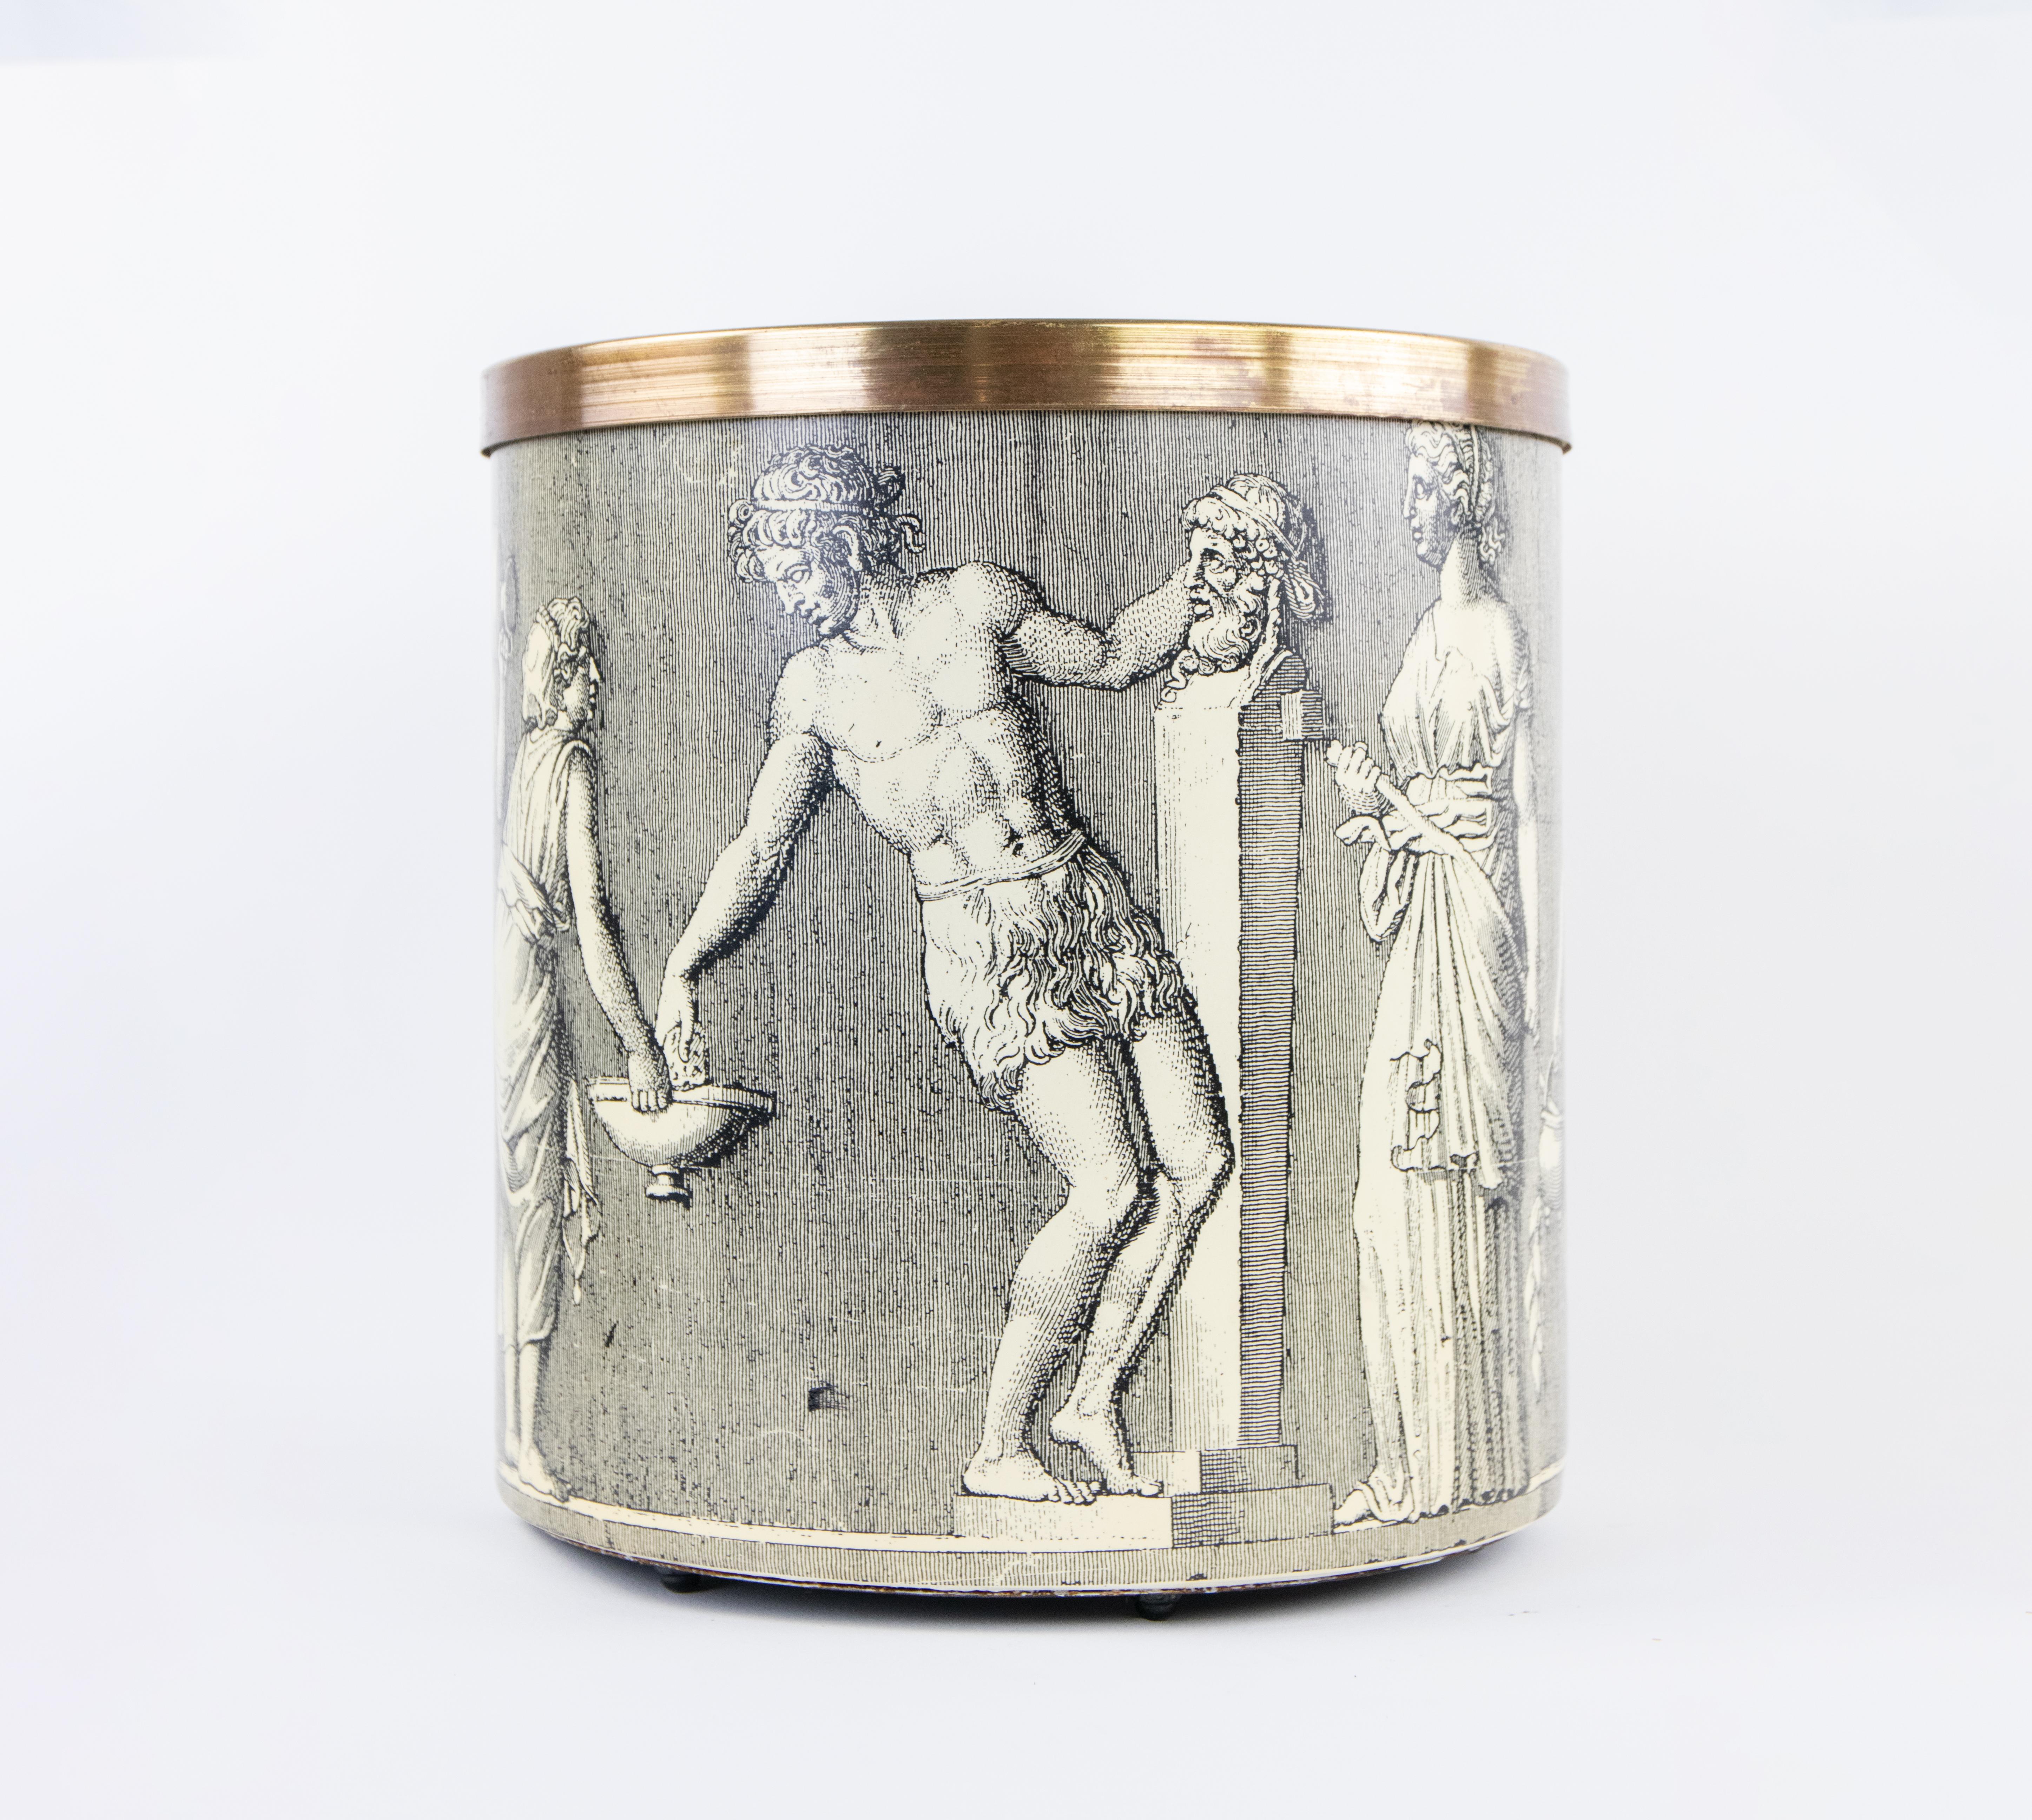 French Vintage Waste Paper Basket by Piero Fornasetti, 1950s